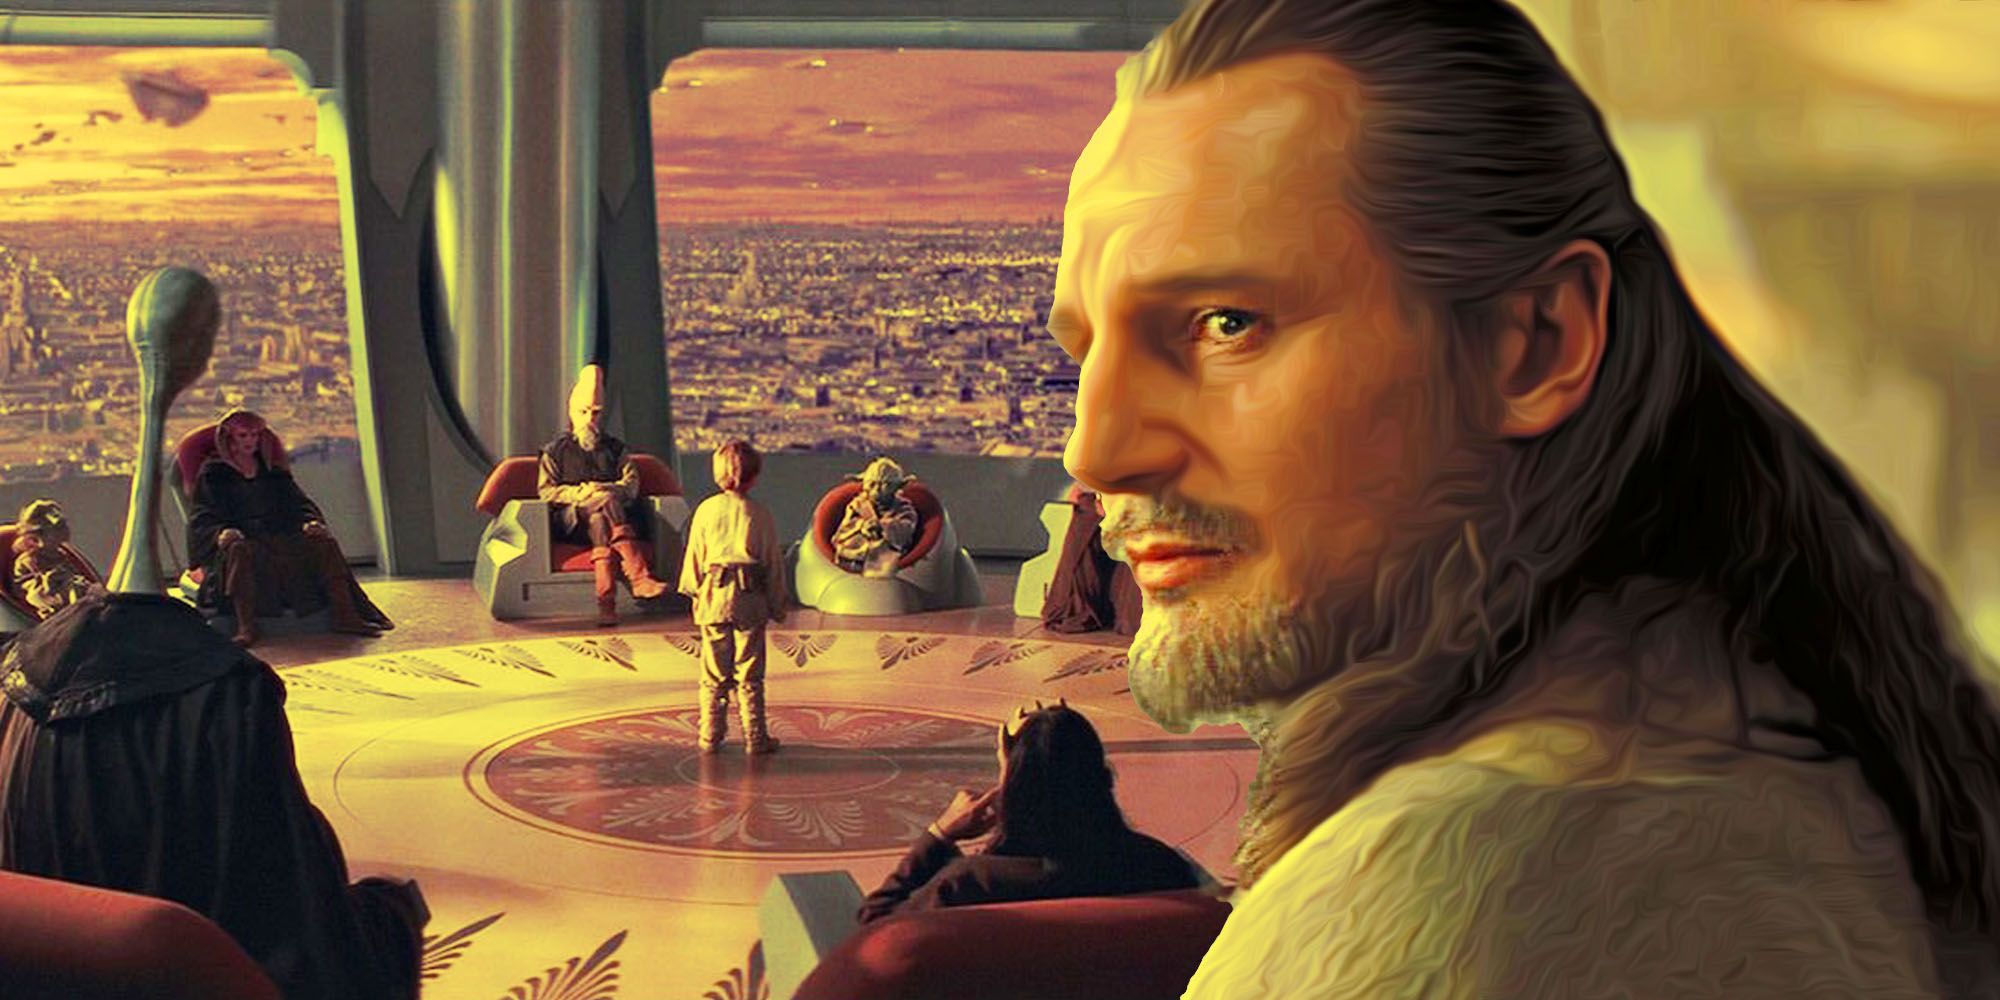 The Jedi Council evaluating young Anakin Skywalker and a picture of Qui-Gon Jinn.